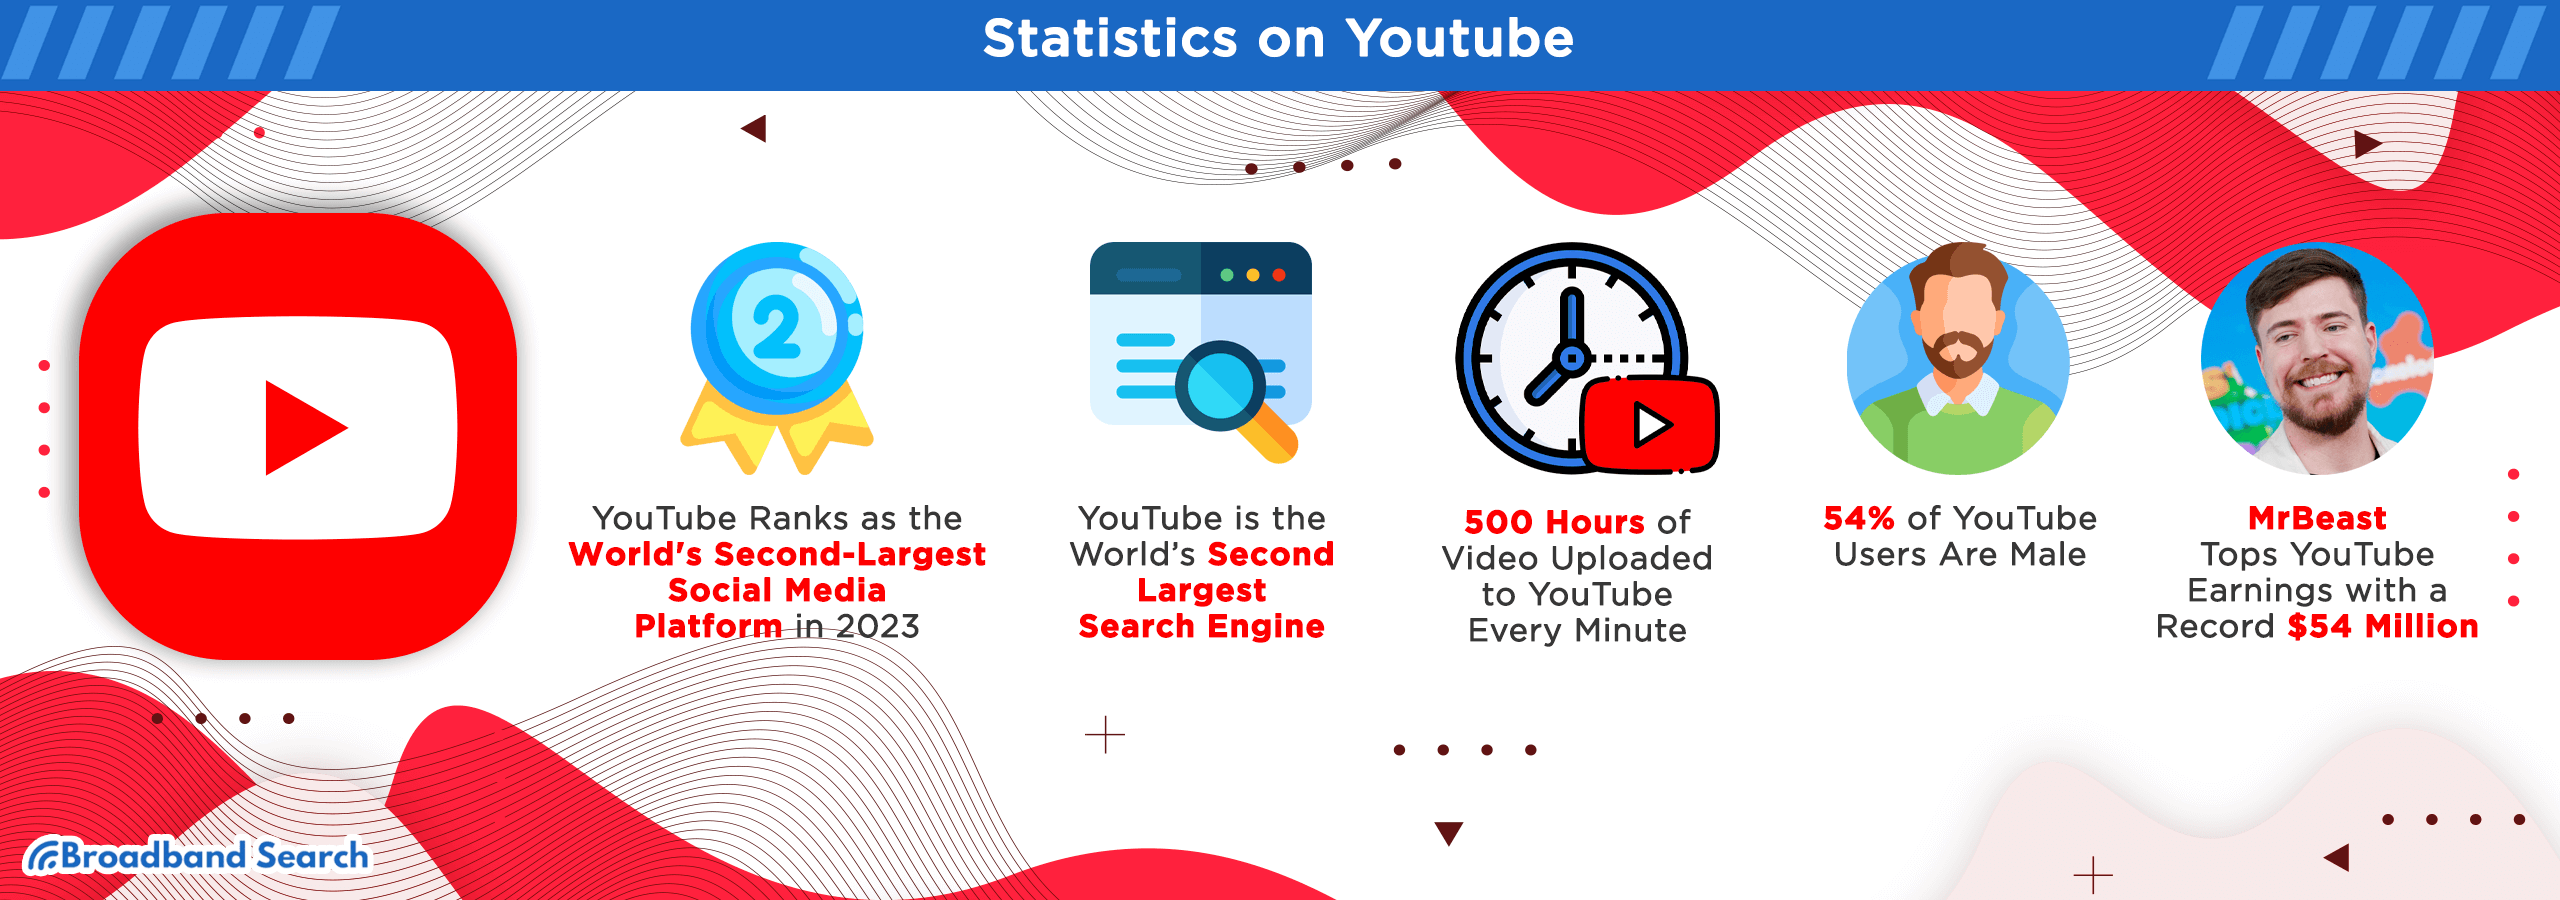 five statistics about Youtube